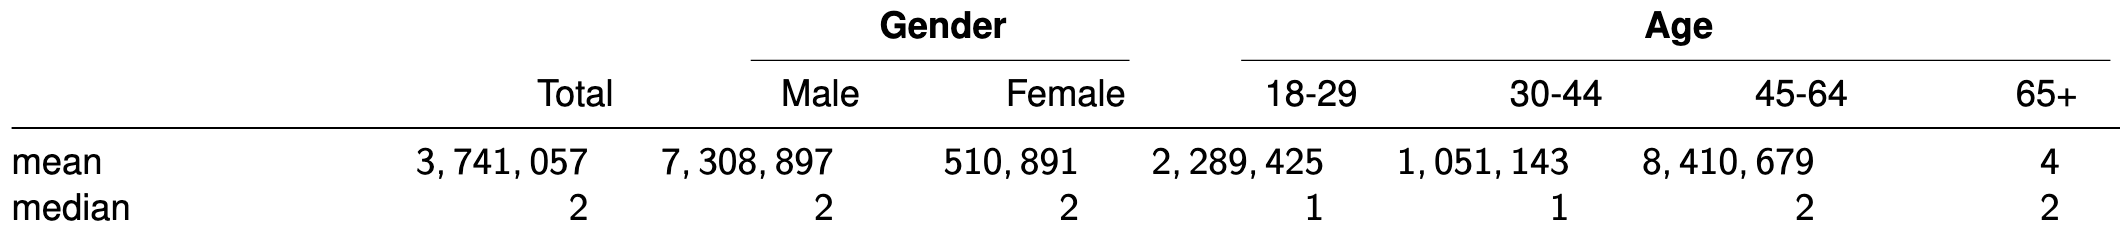 The same table as above, but with a row added with the medians. For all demographics, the median is 1 or 2